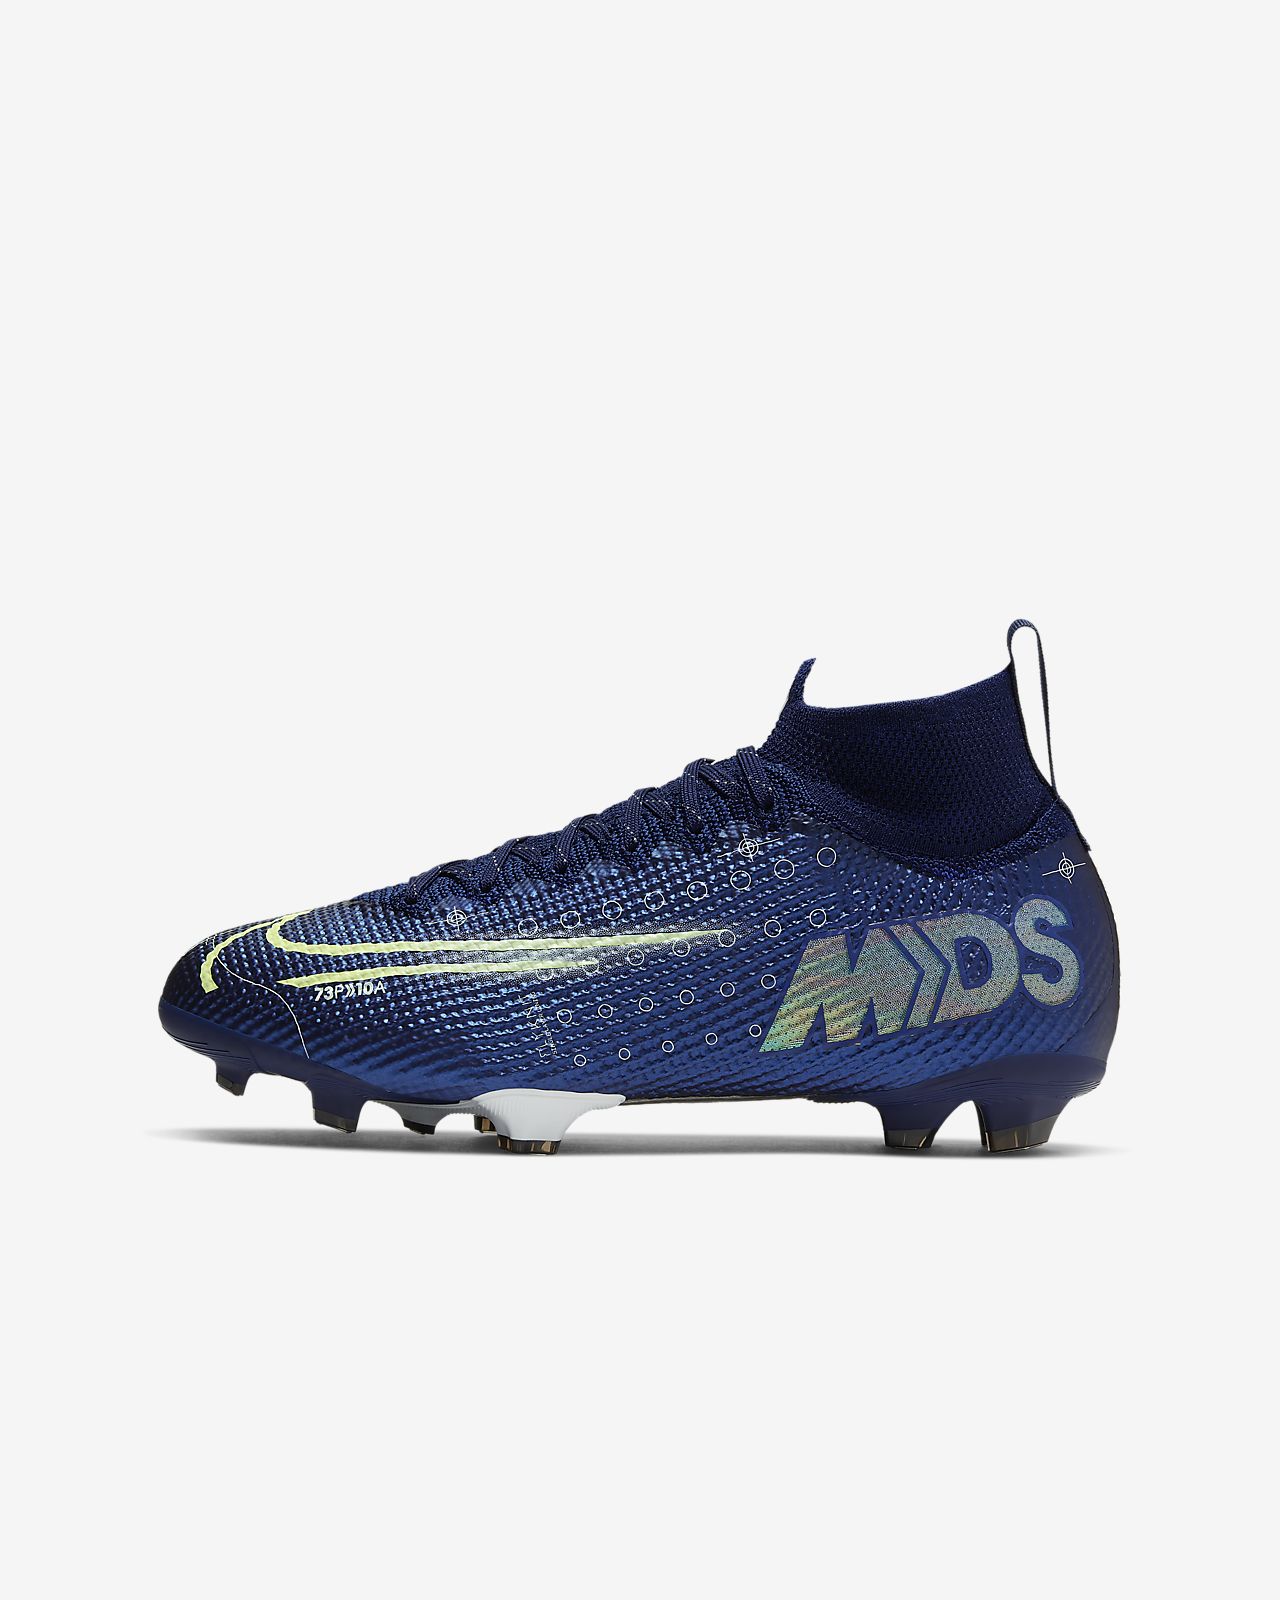 Nike Mercurial Superfly 4 CR7 Gala Review Soccer Soccer